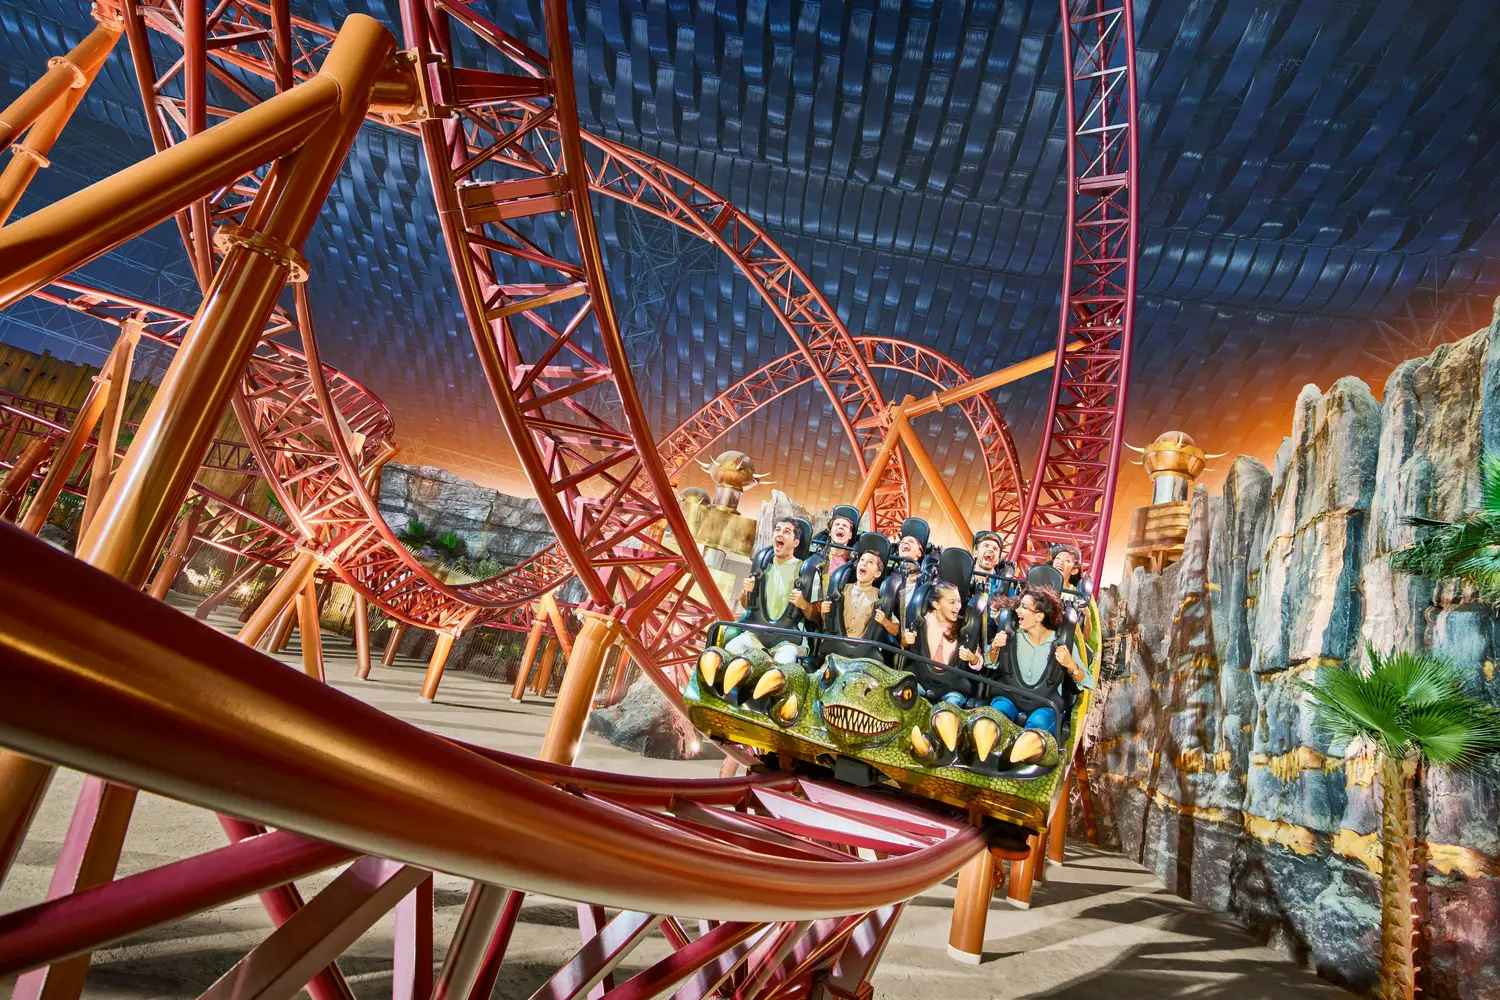 The Predator ride at the IMG Worlds of Adventure